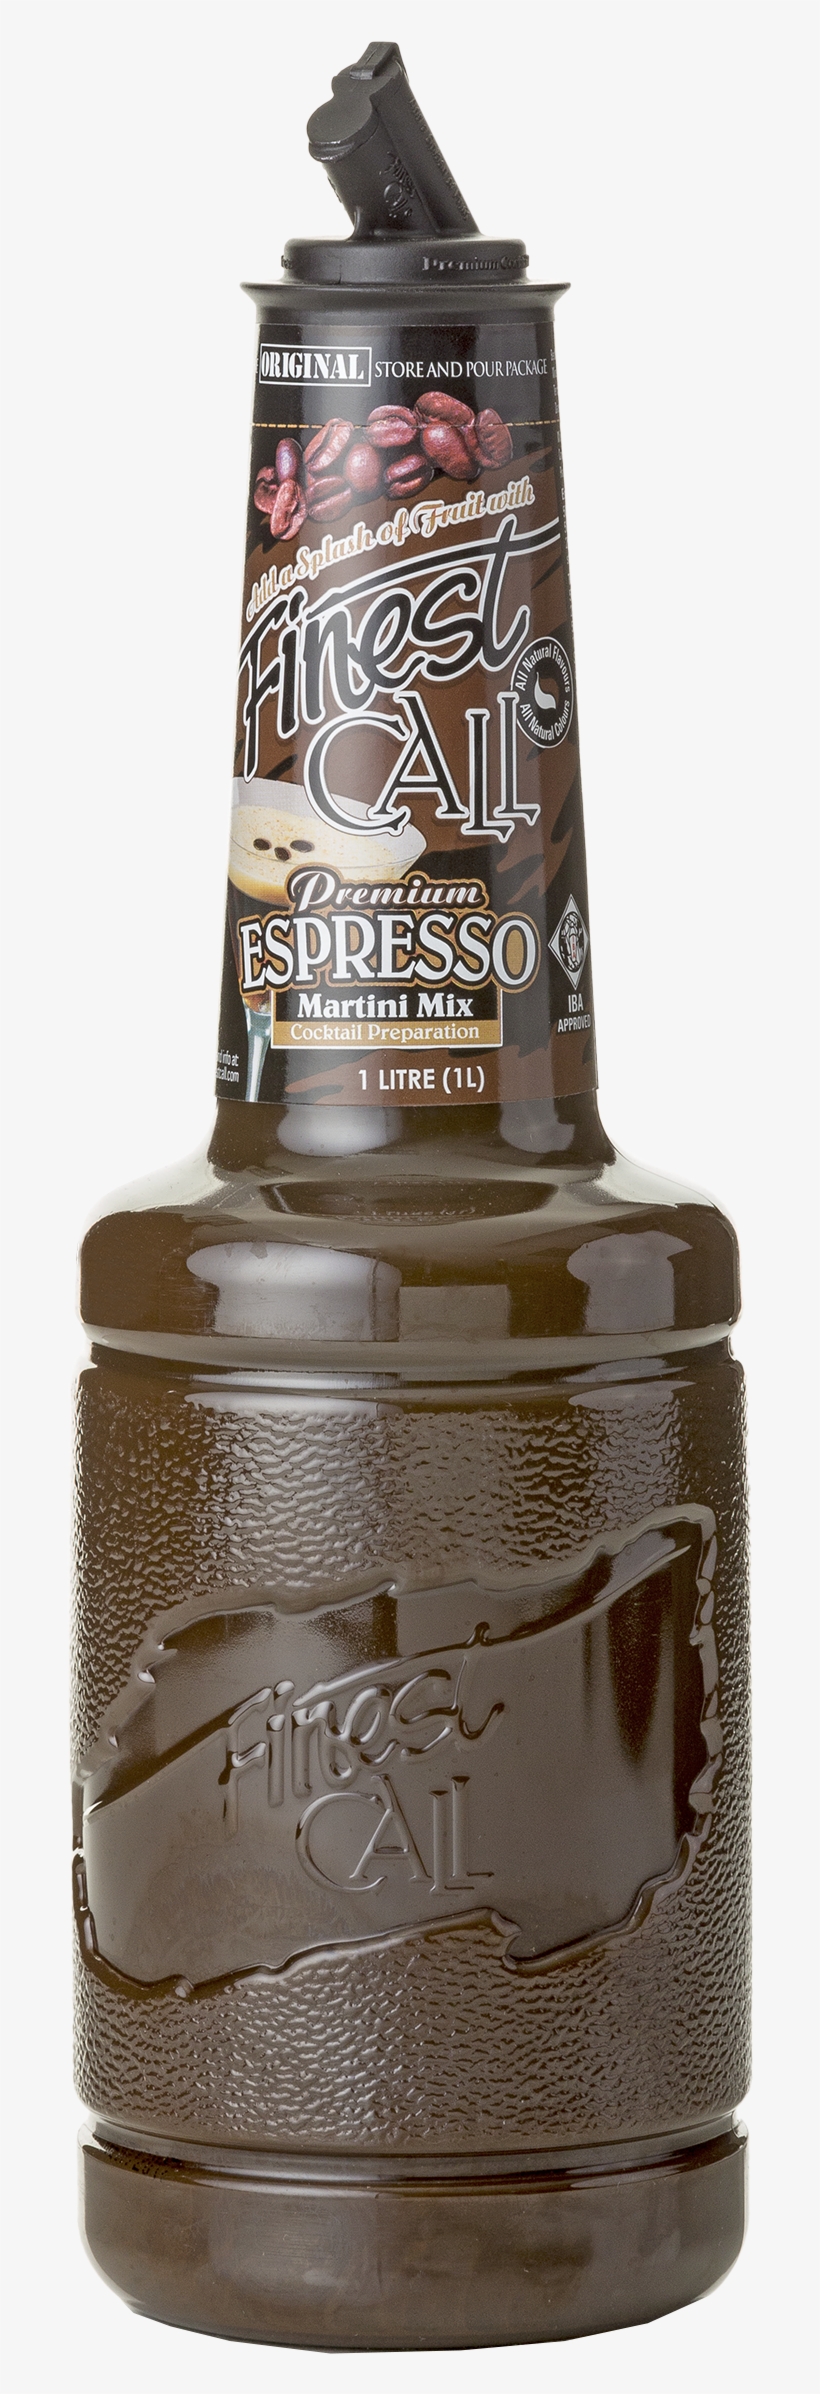 Check Out Other Recipes Using - Finest Call Espresso Martini, transparent png #4413068